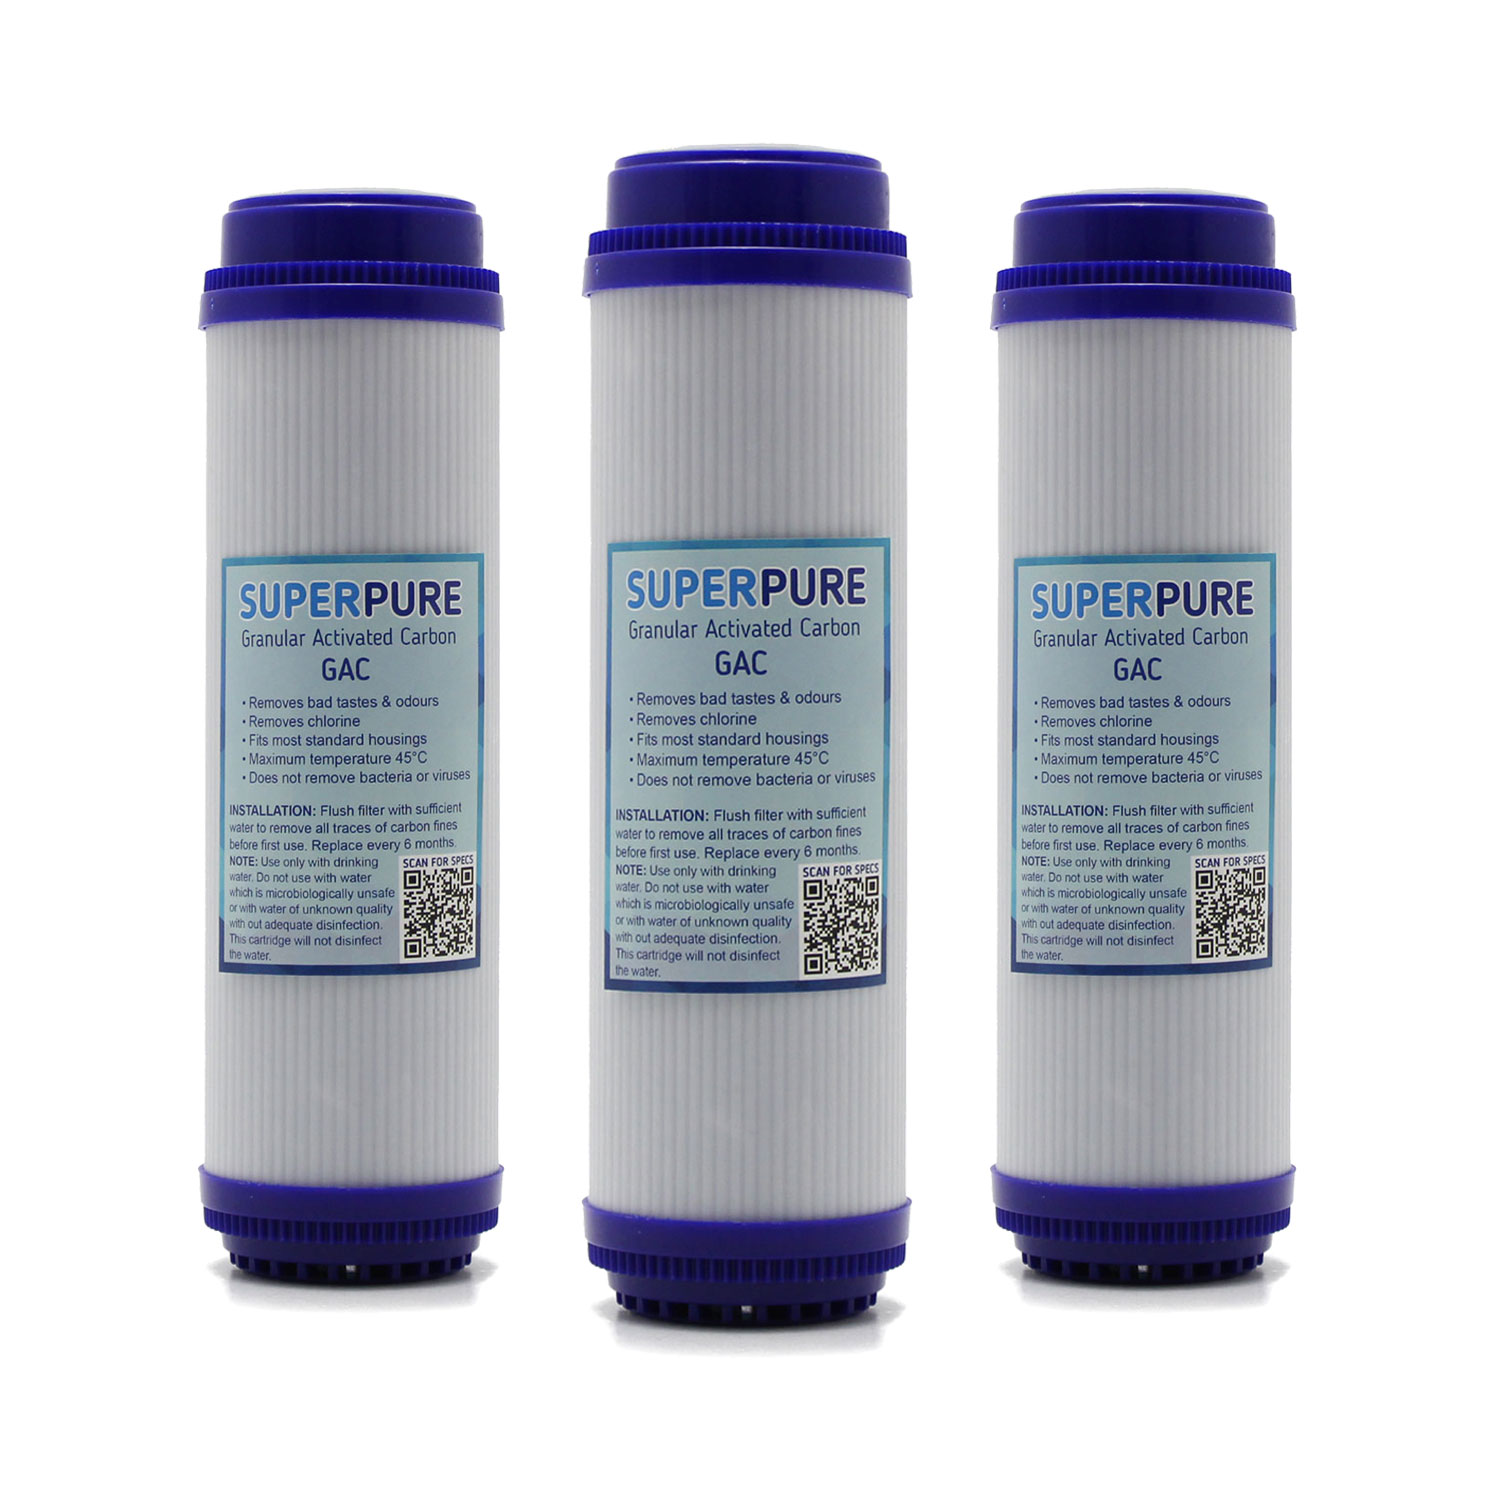 SUPERPURE 10 inch Granular Activated Carbon Filter (3 Pack)